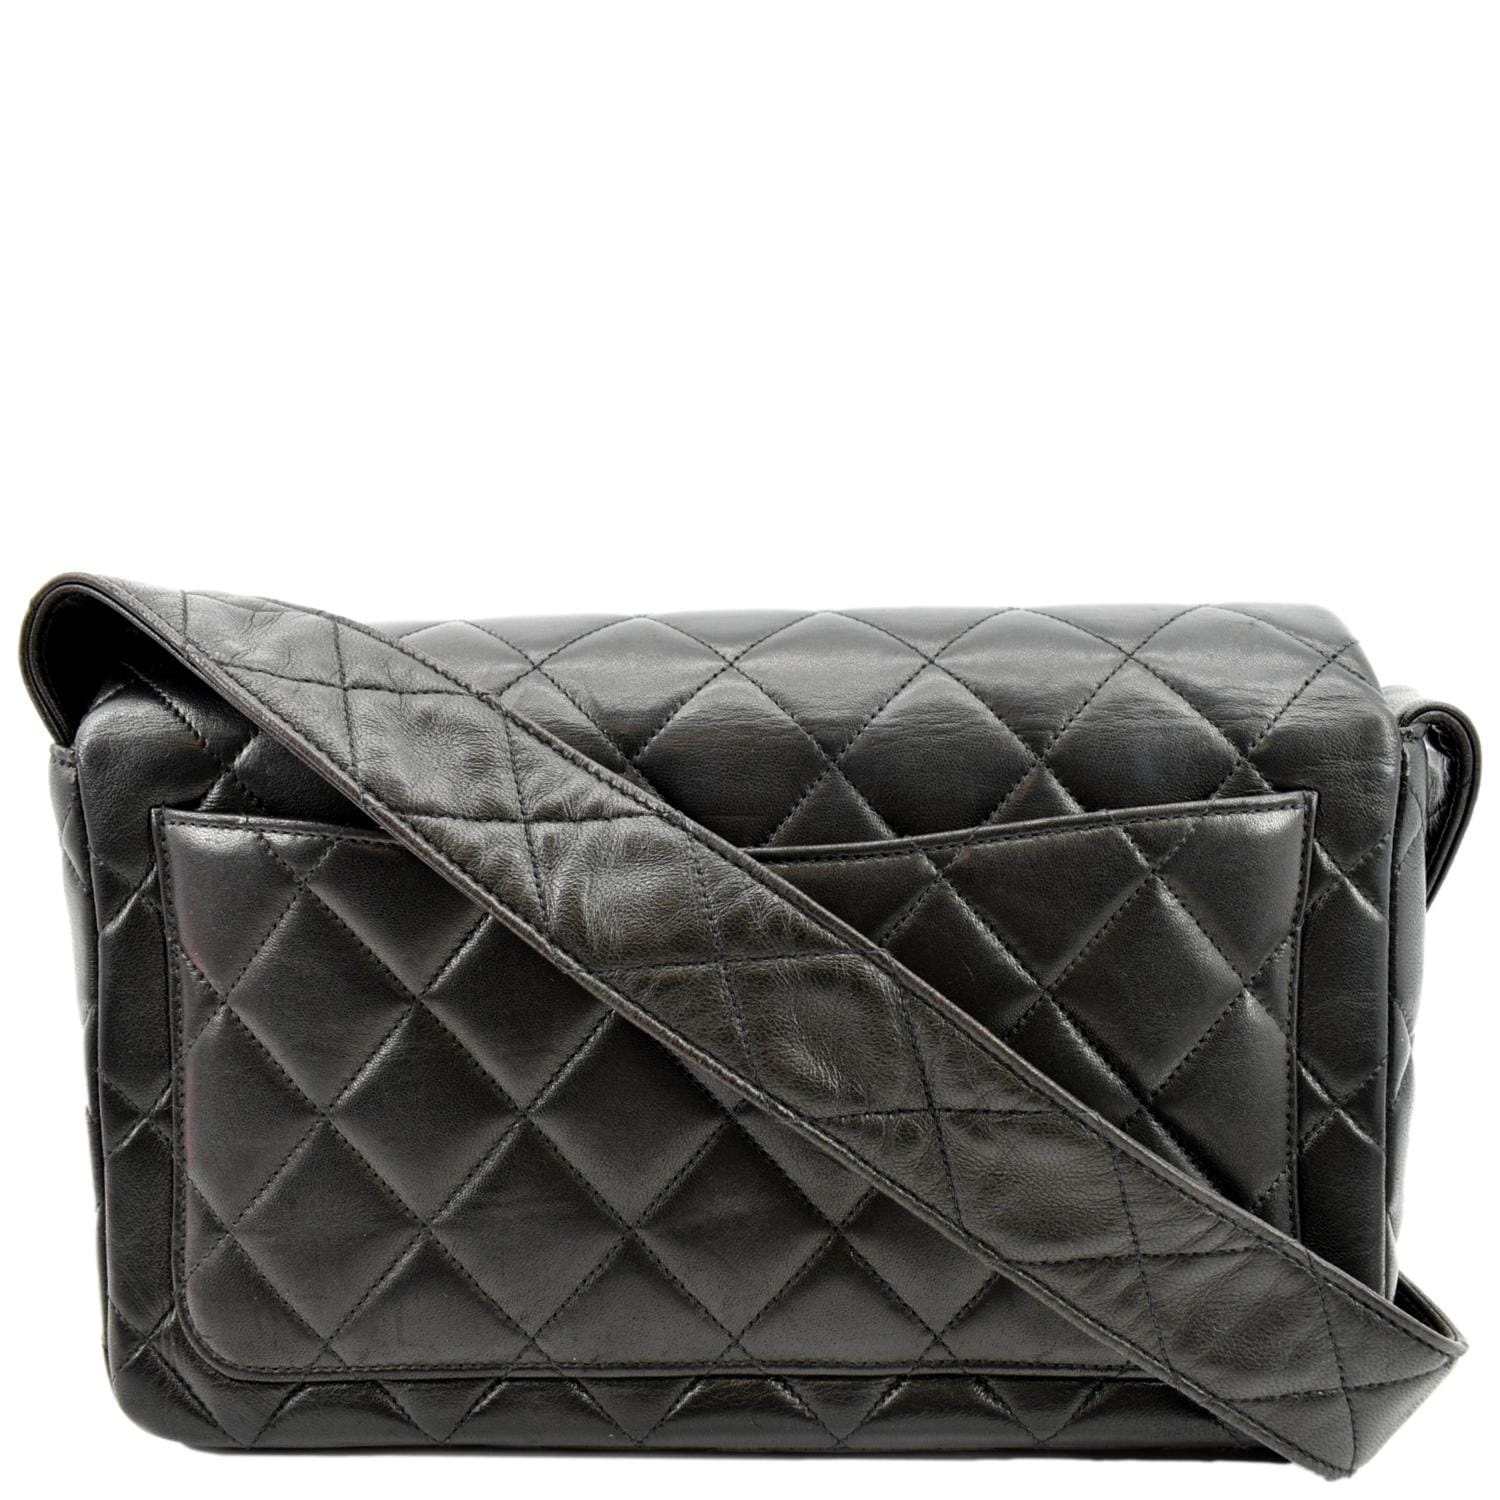 CHANEL Paris Dallas double flap bag in dark gray quilted thick